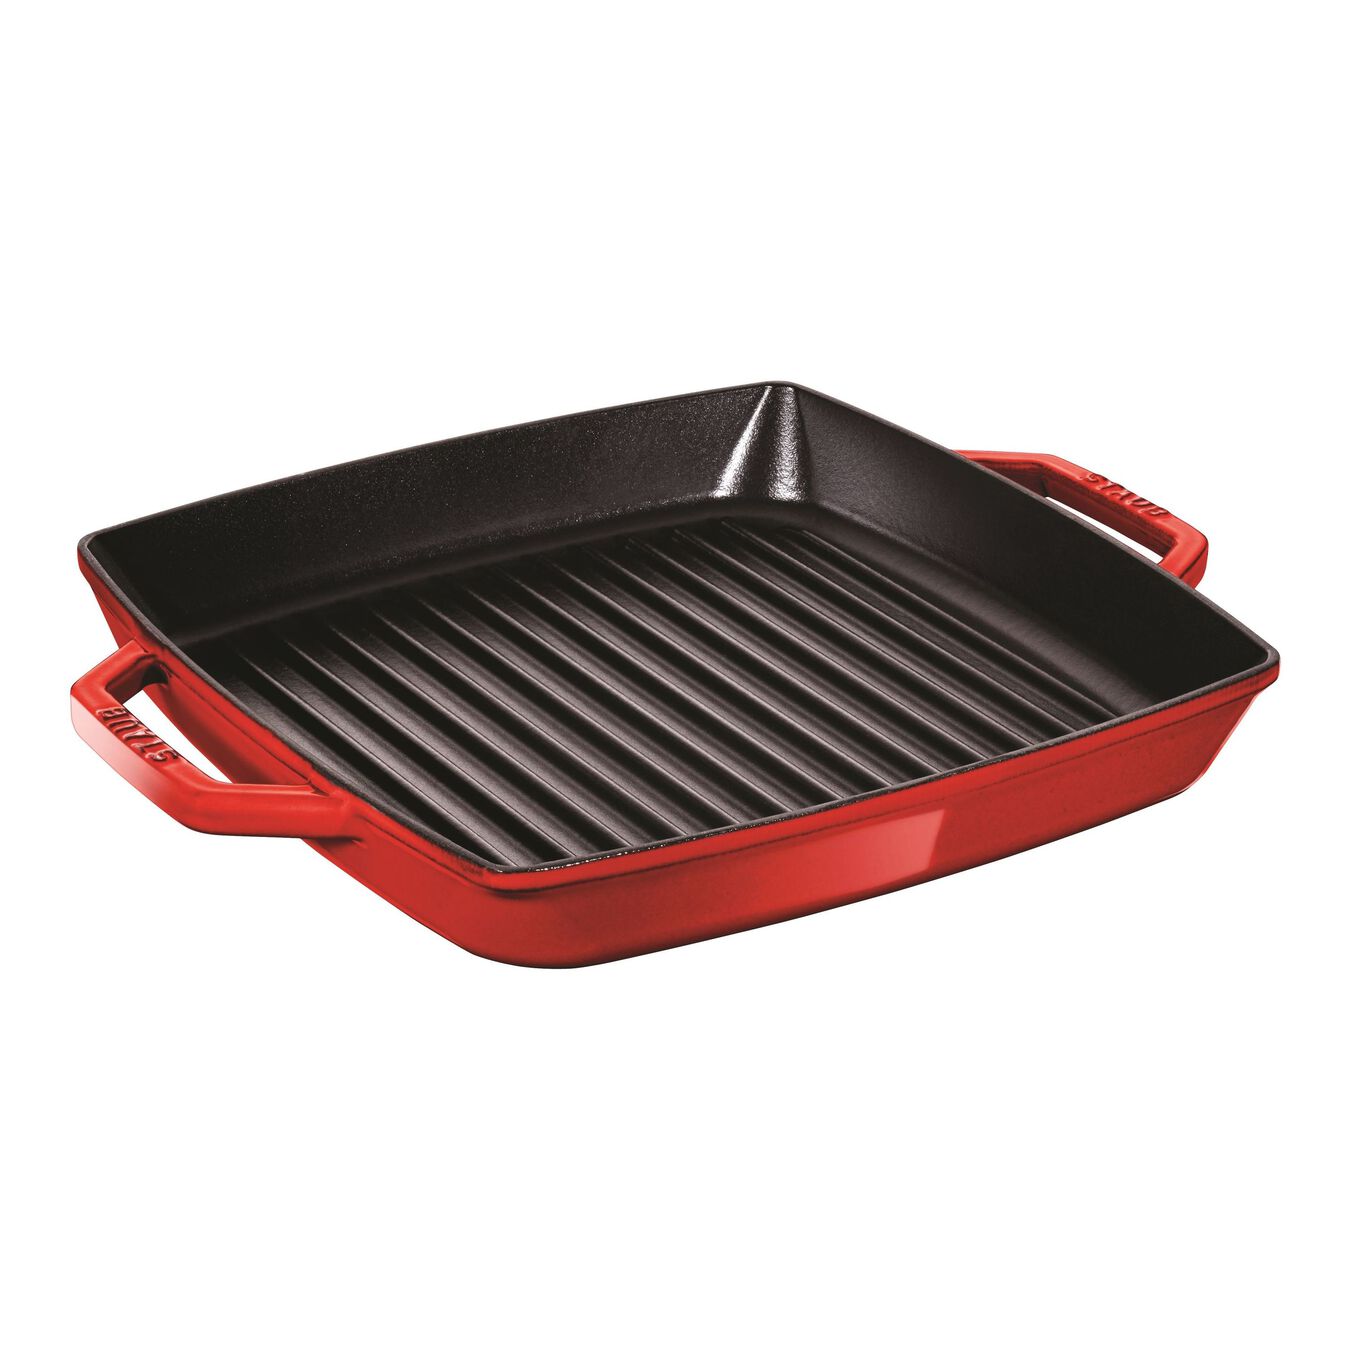 28 cm / 11 inch cast iron square Grill pan, cherry,,large 1